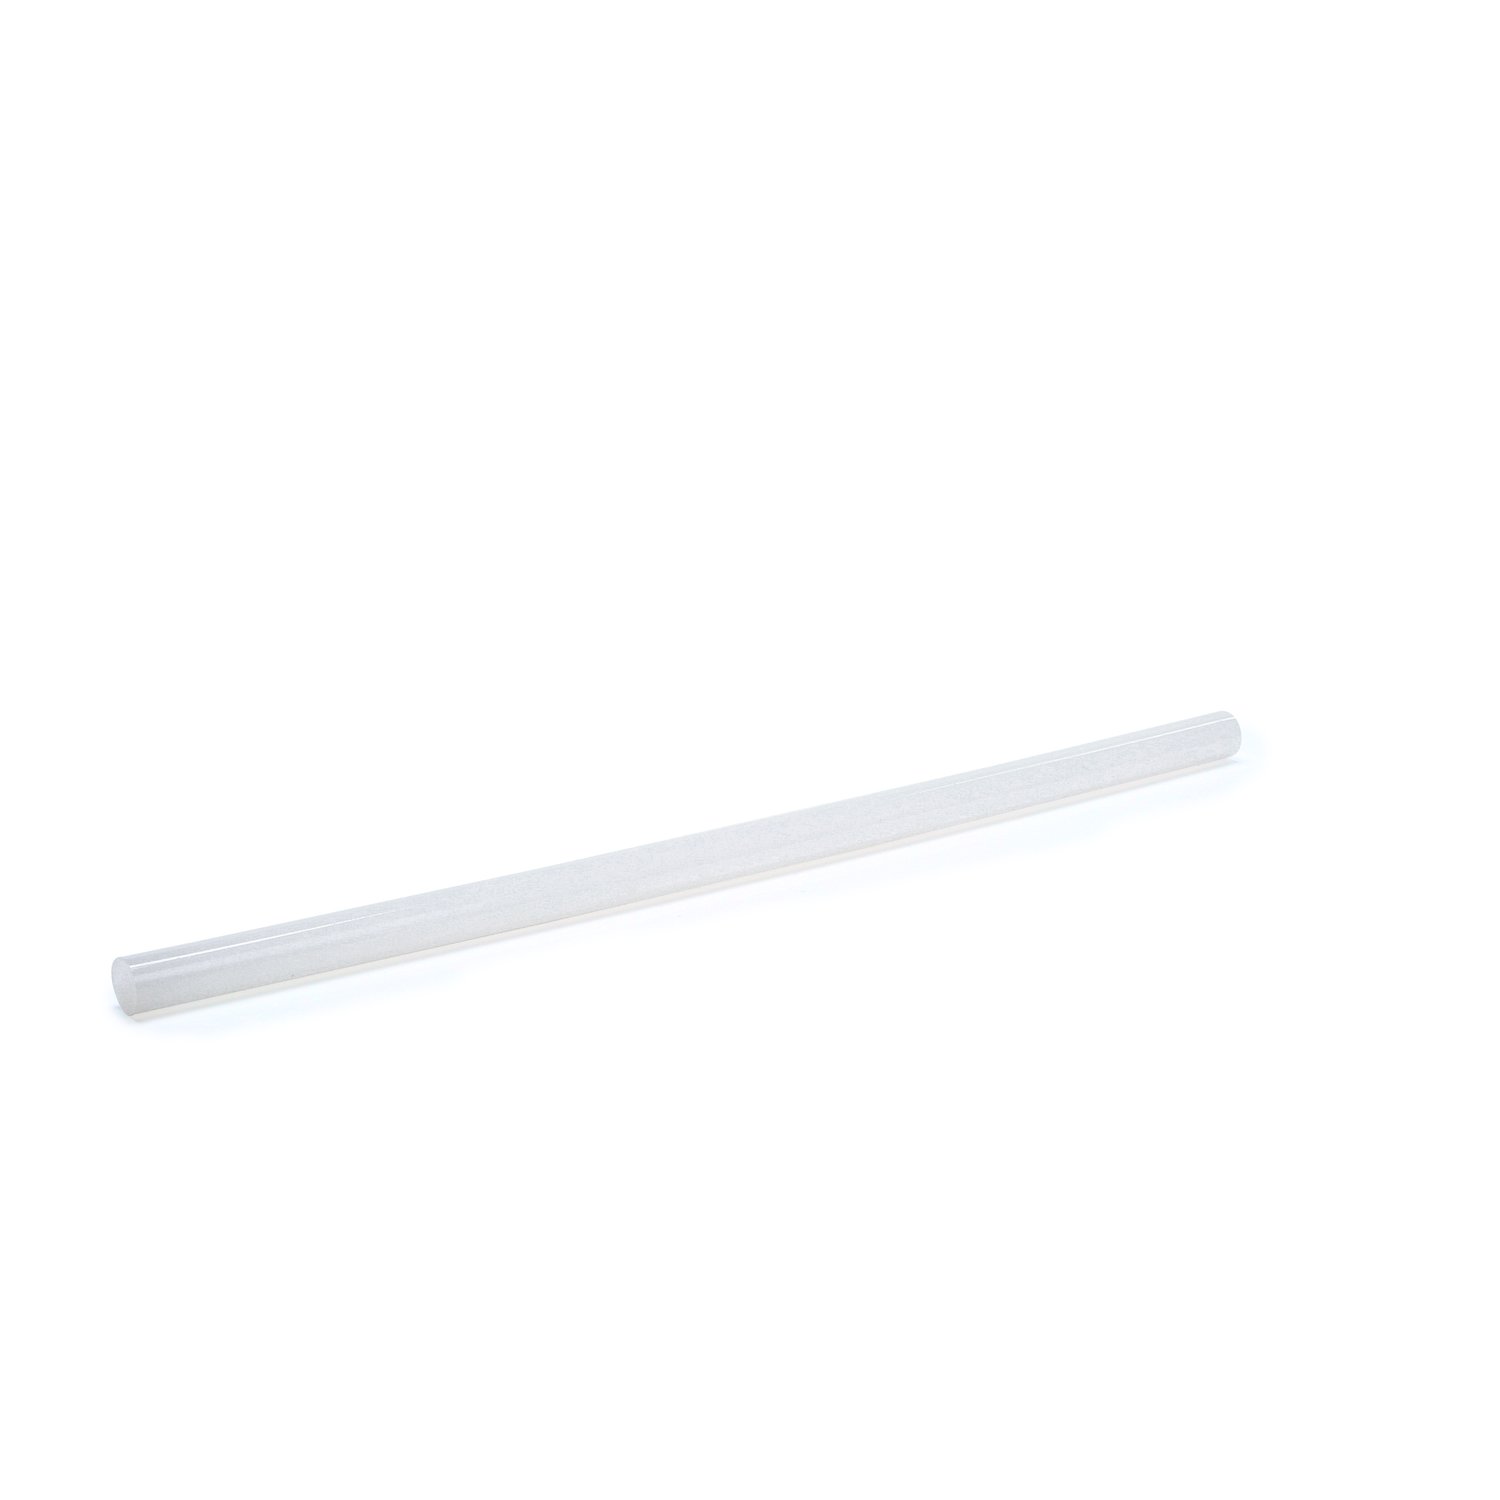 7100020335 - 3M Hot Melt Adhesive 3792 AE, Clear, 0.45 in x 12 in, 11 lb/case